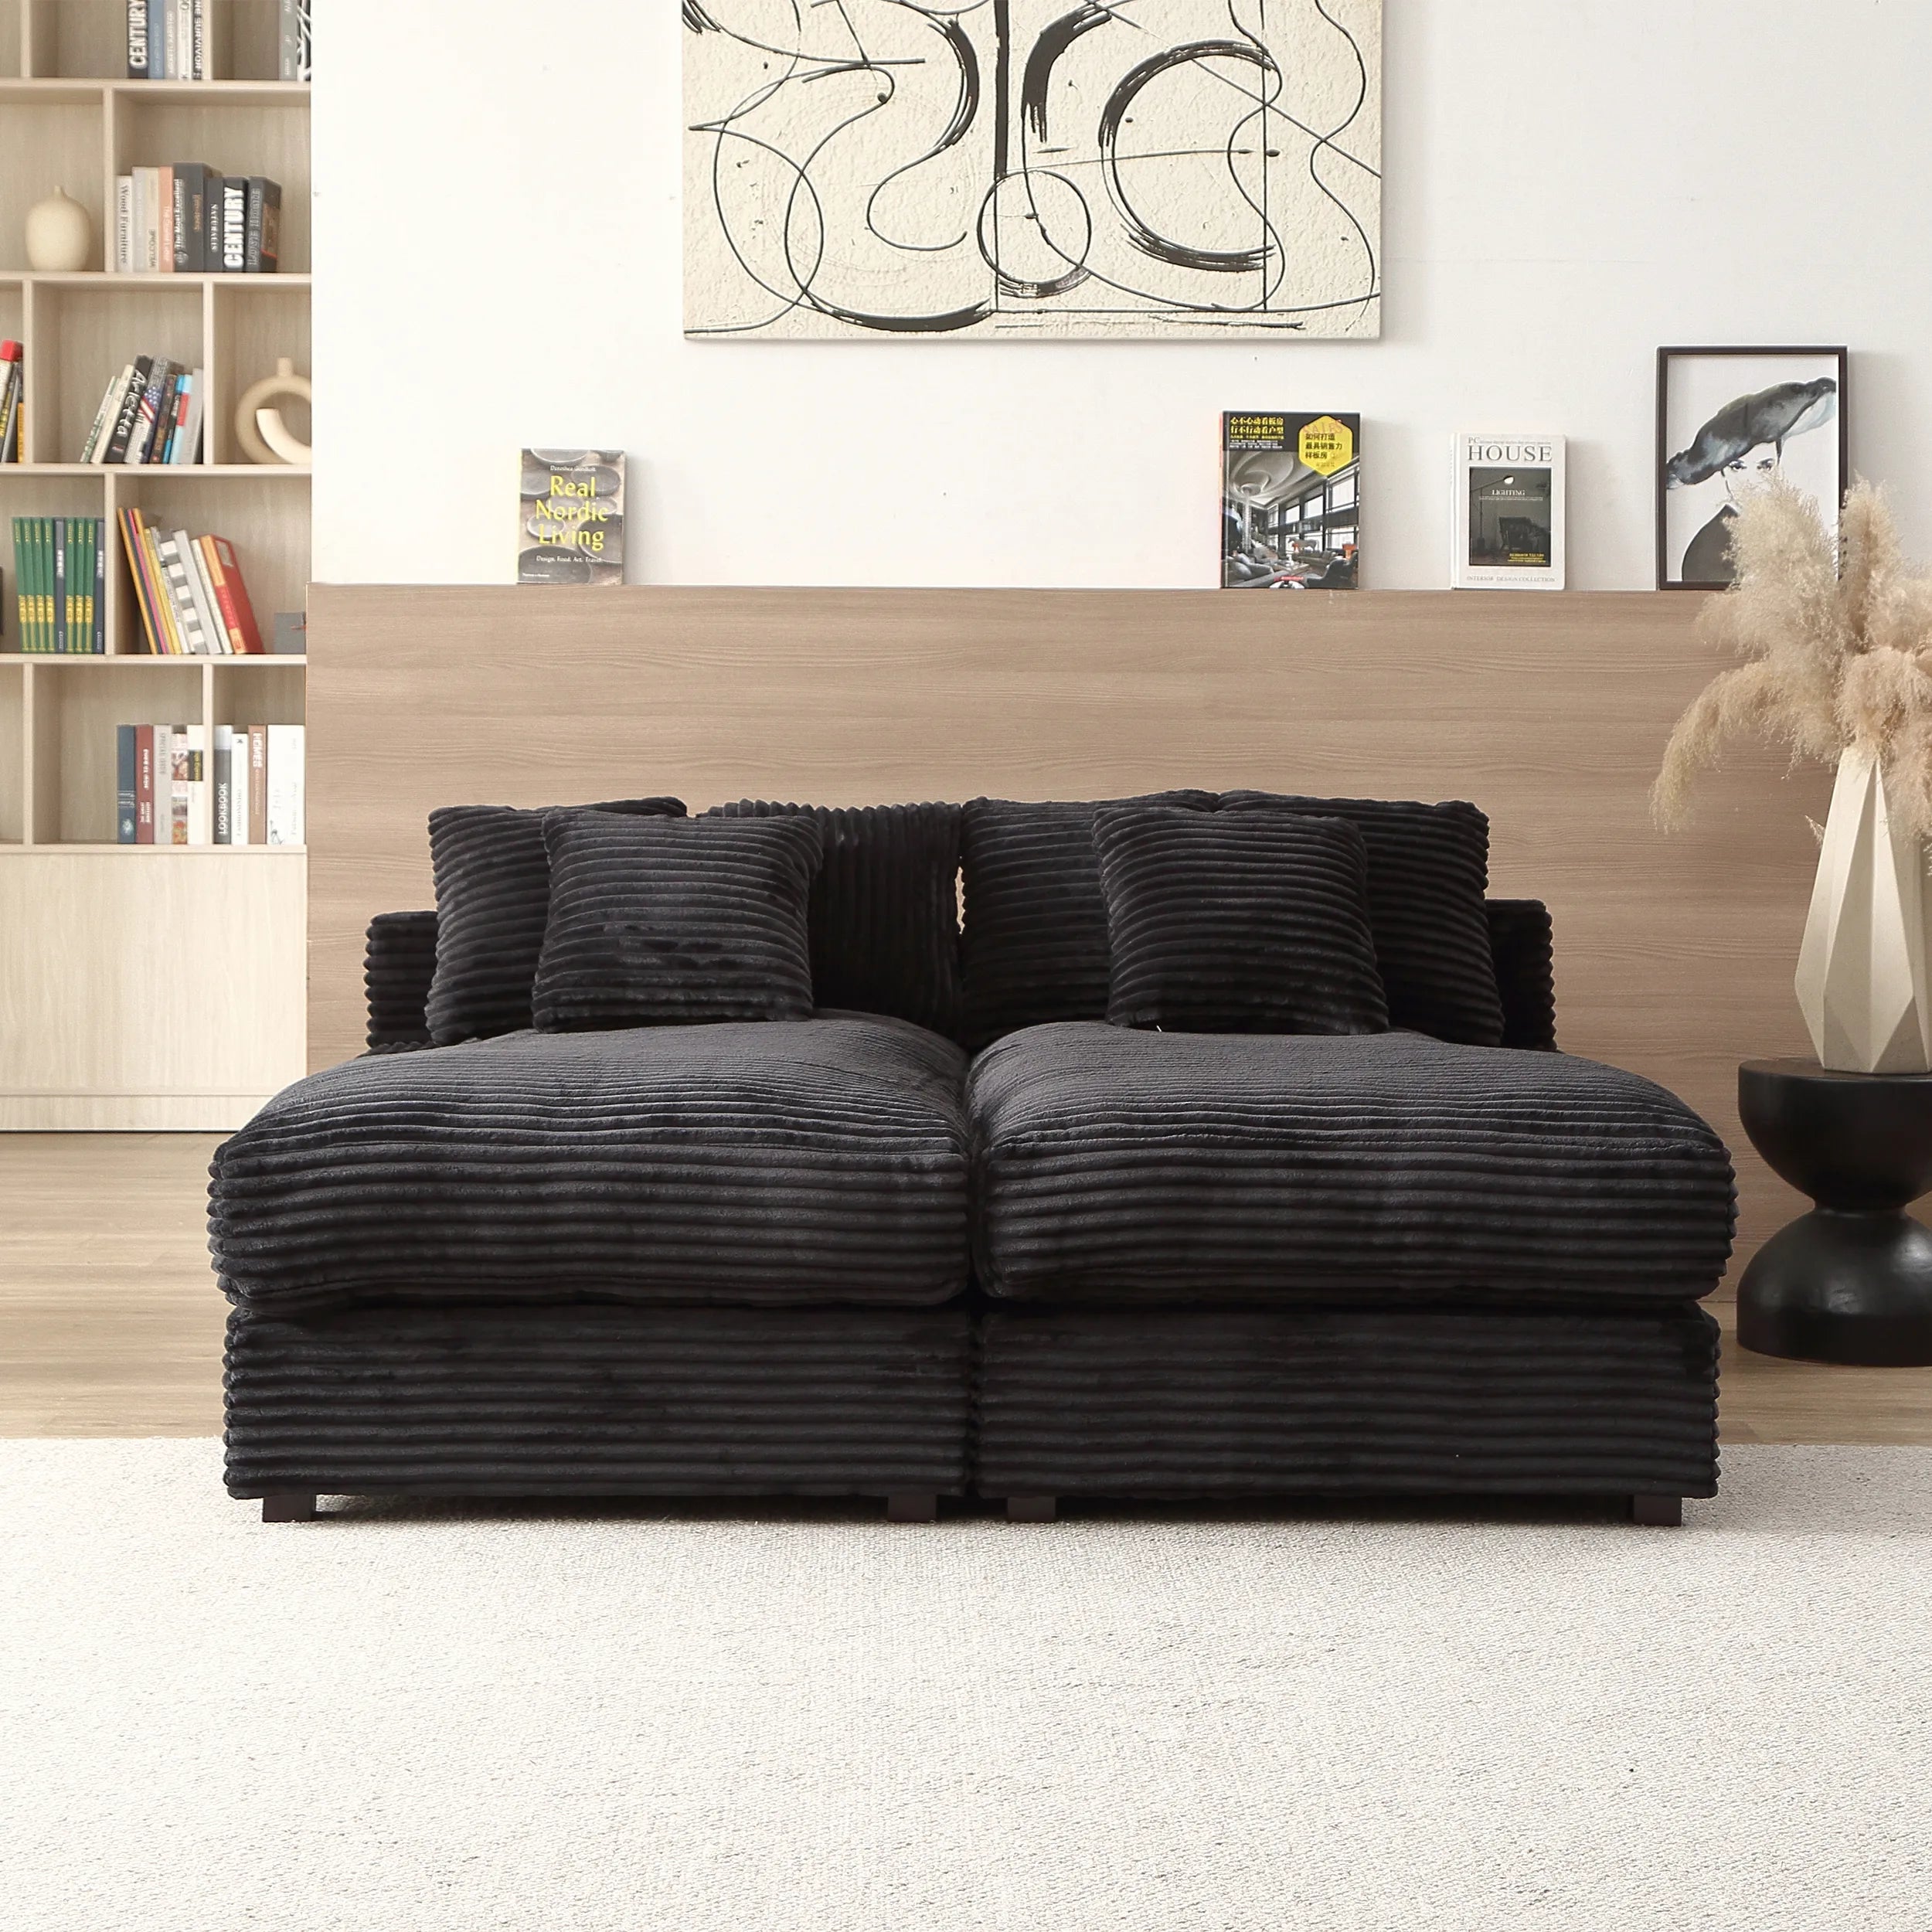 Louie Corduroy Sectional Sofa, Deep Seat Double Chaise Couch - Black